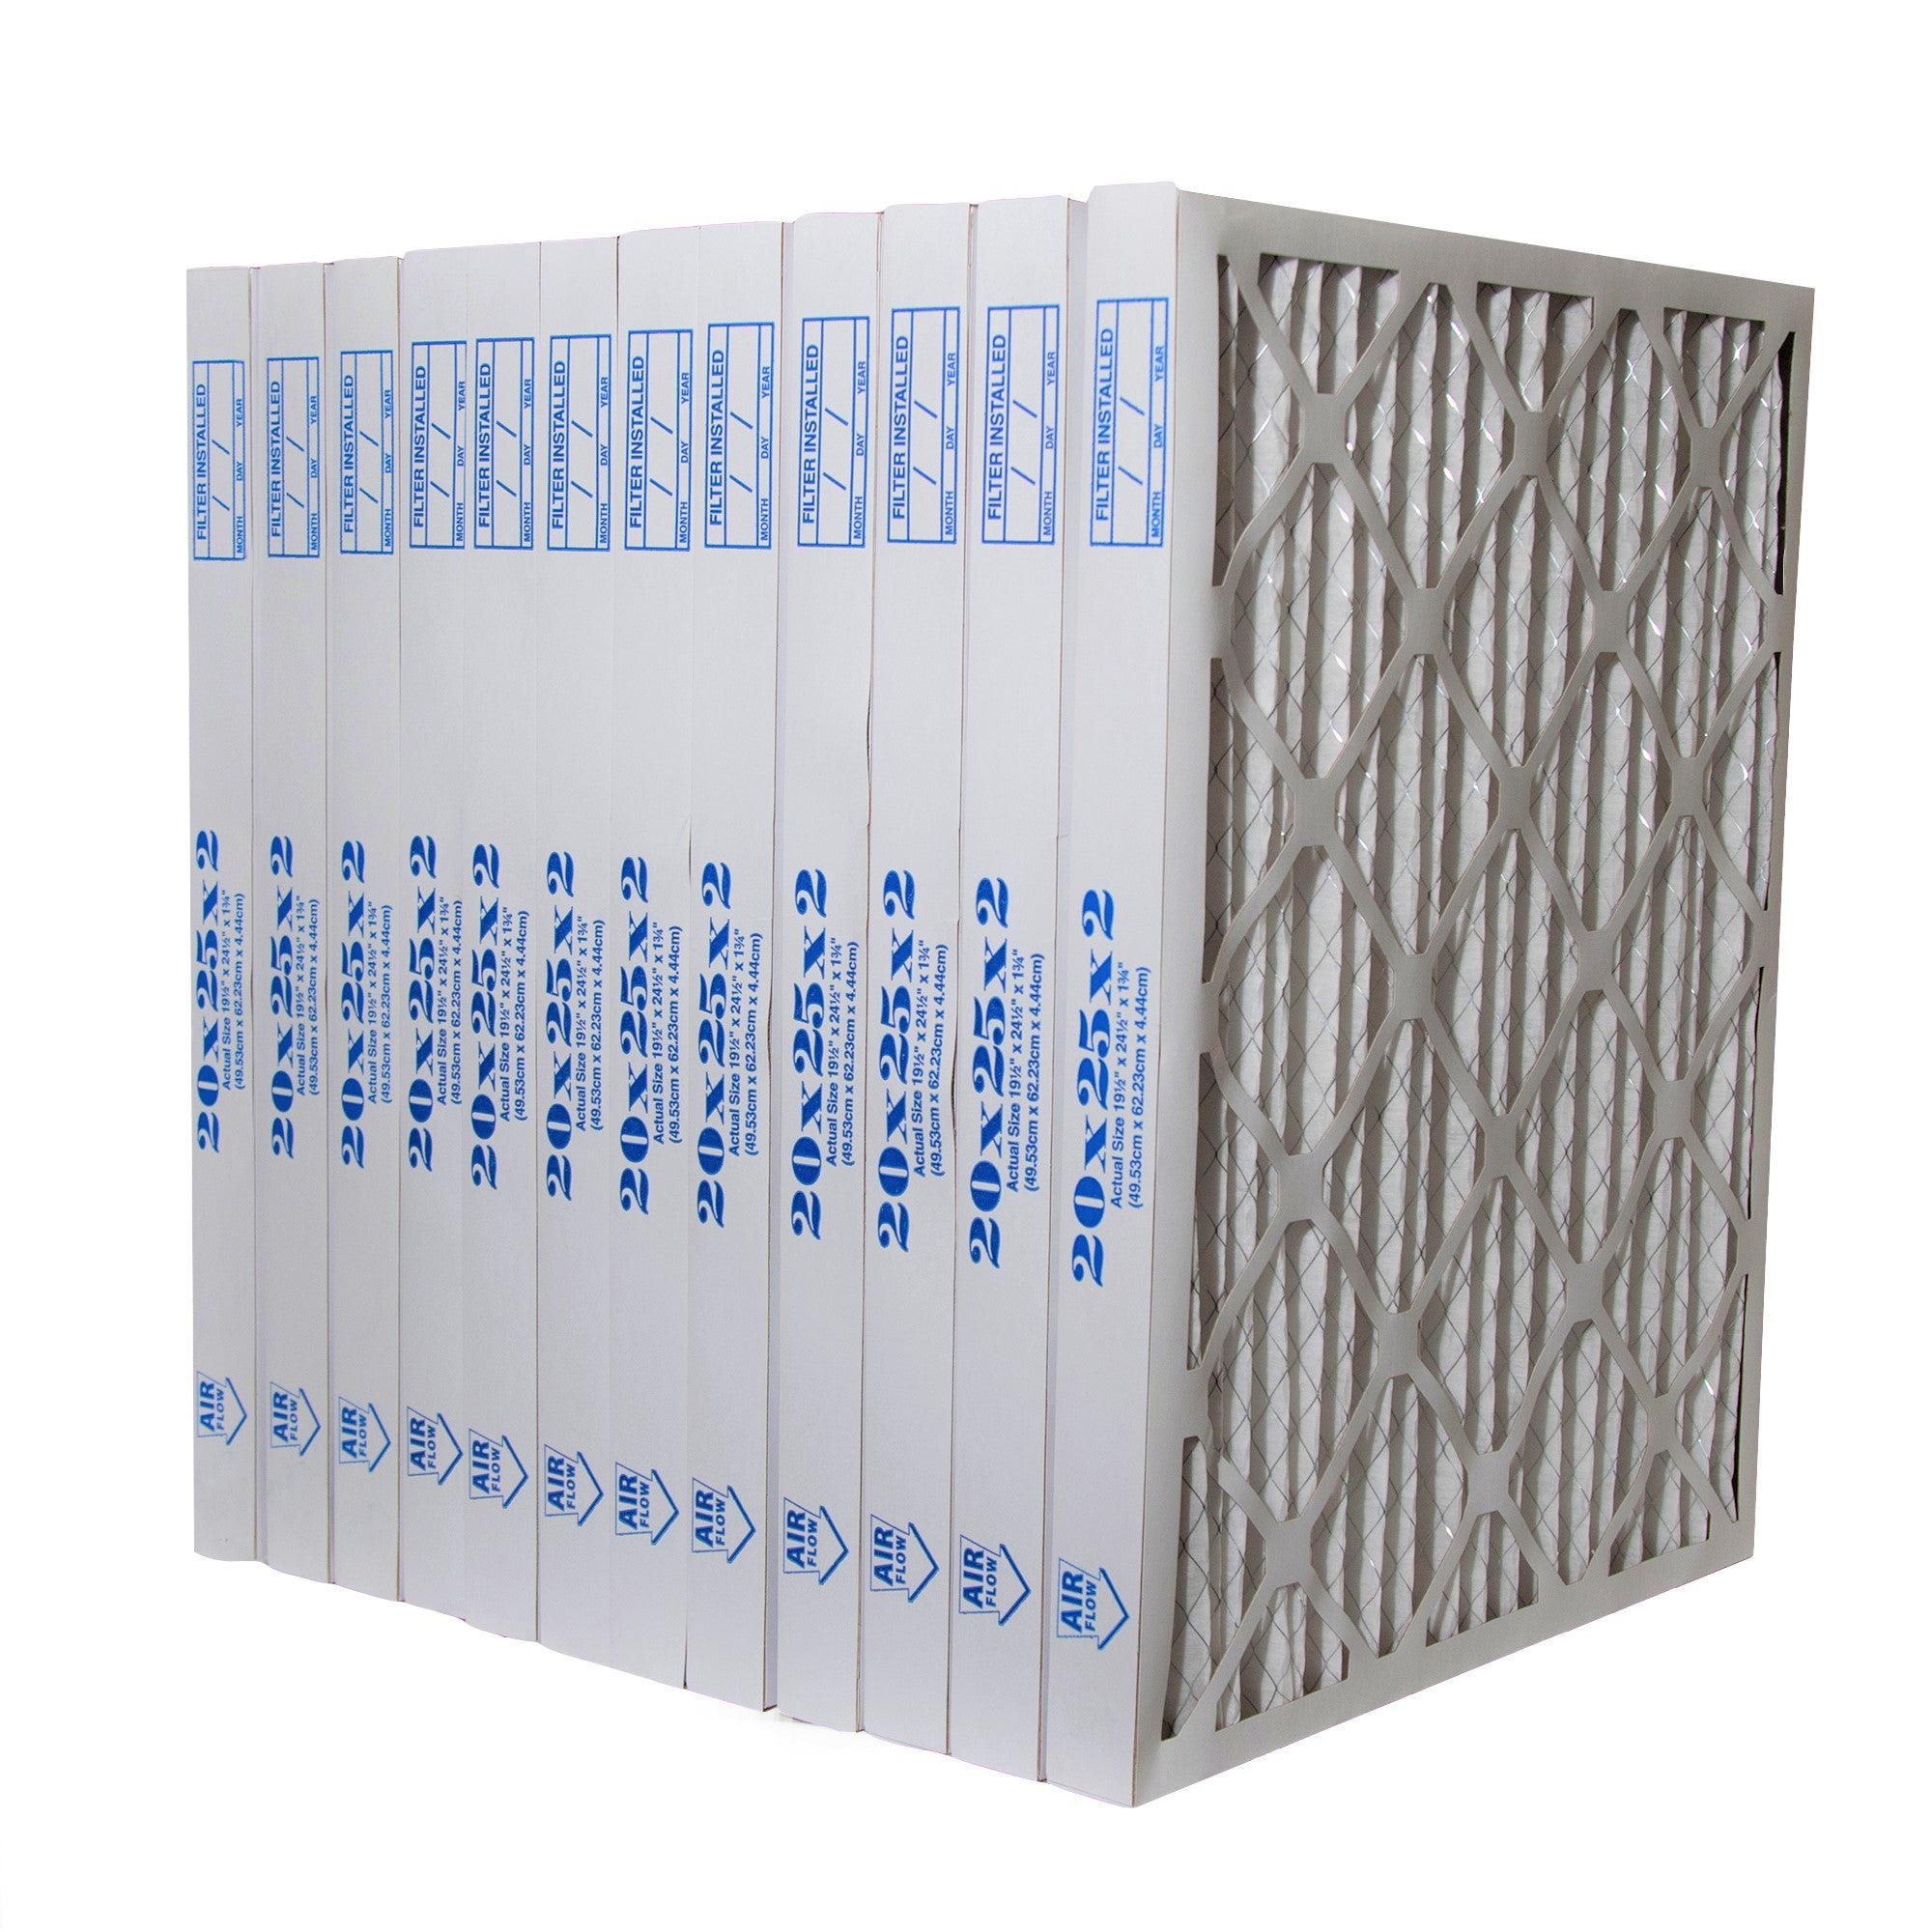 20x25x2 Furnace Filter MERV 8 Pleated Filters. Case of 12